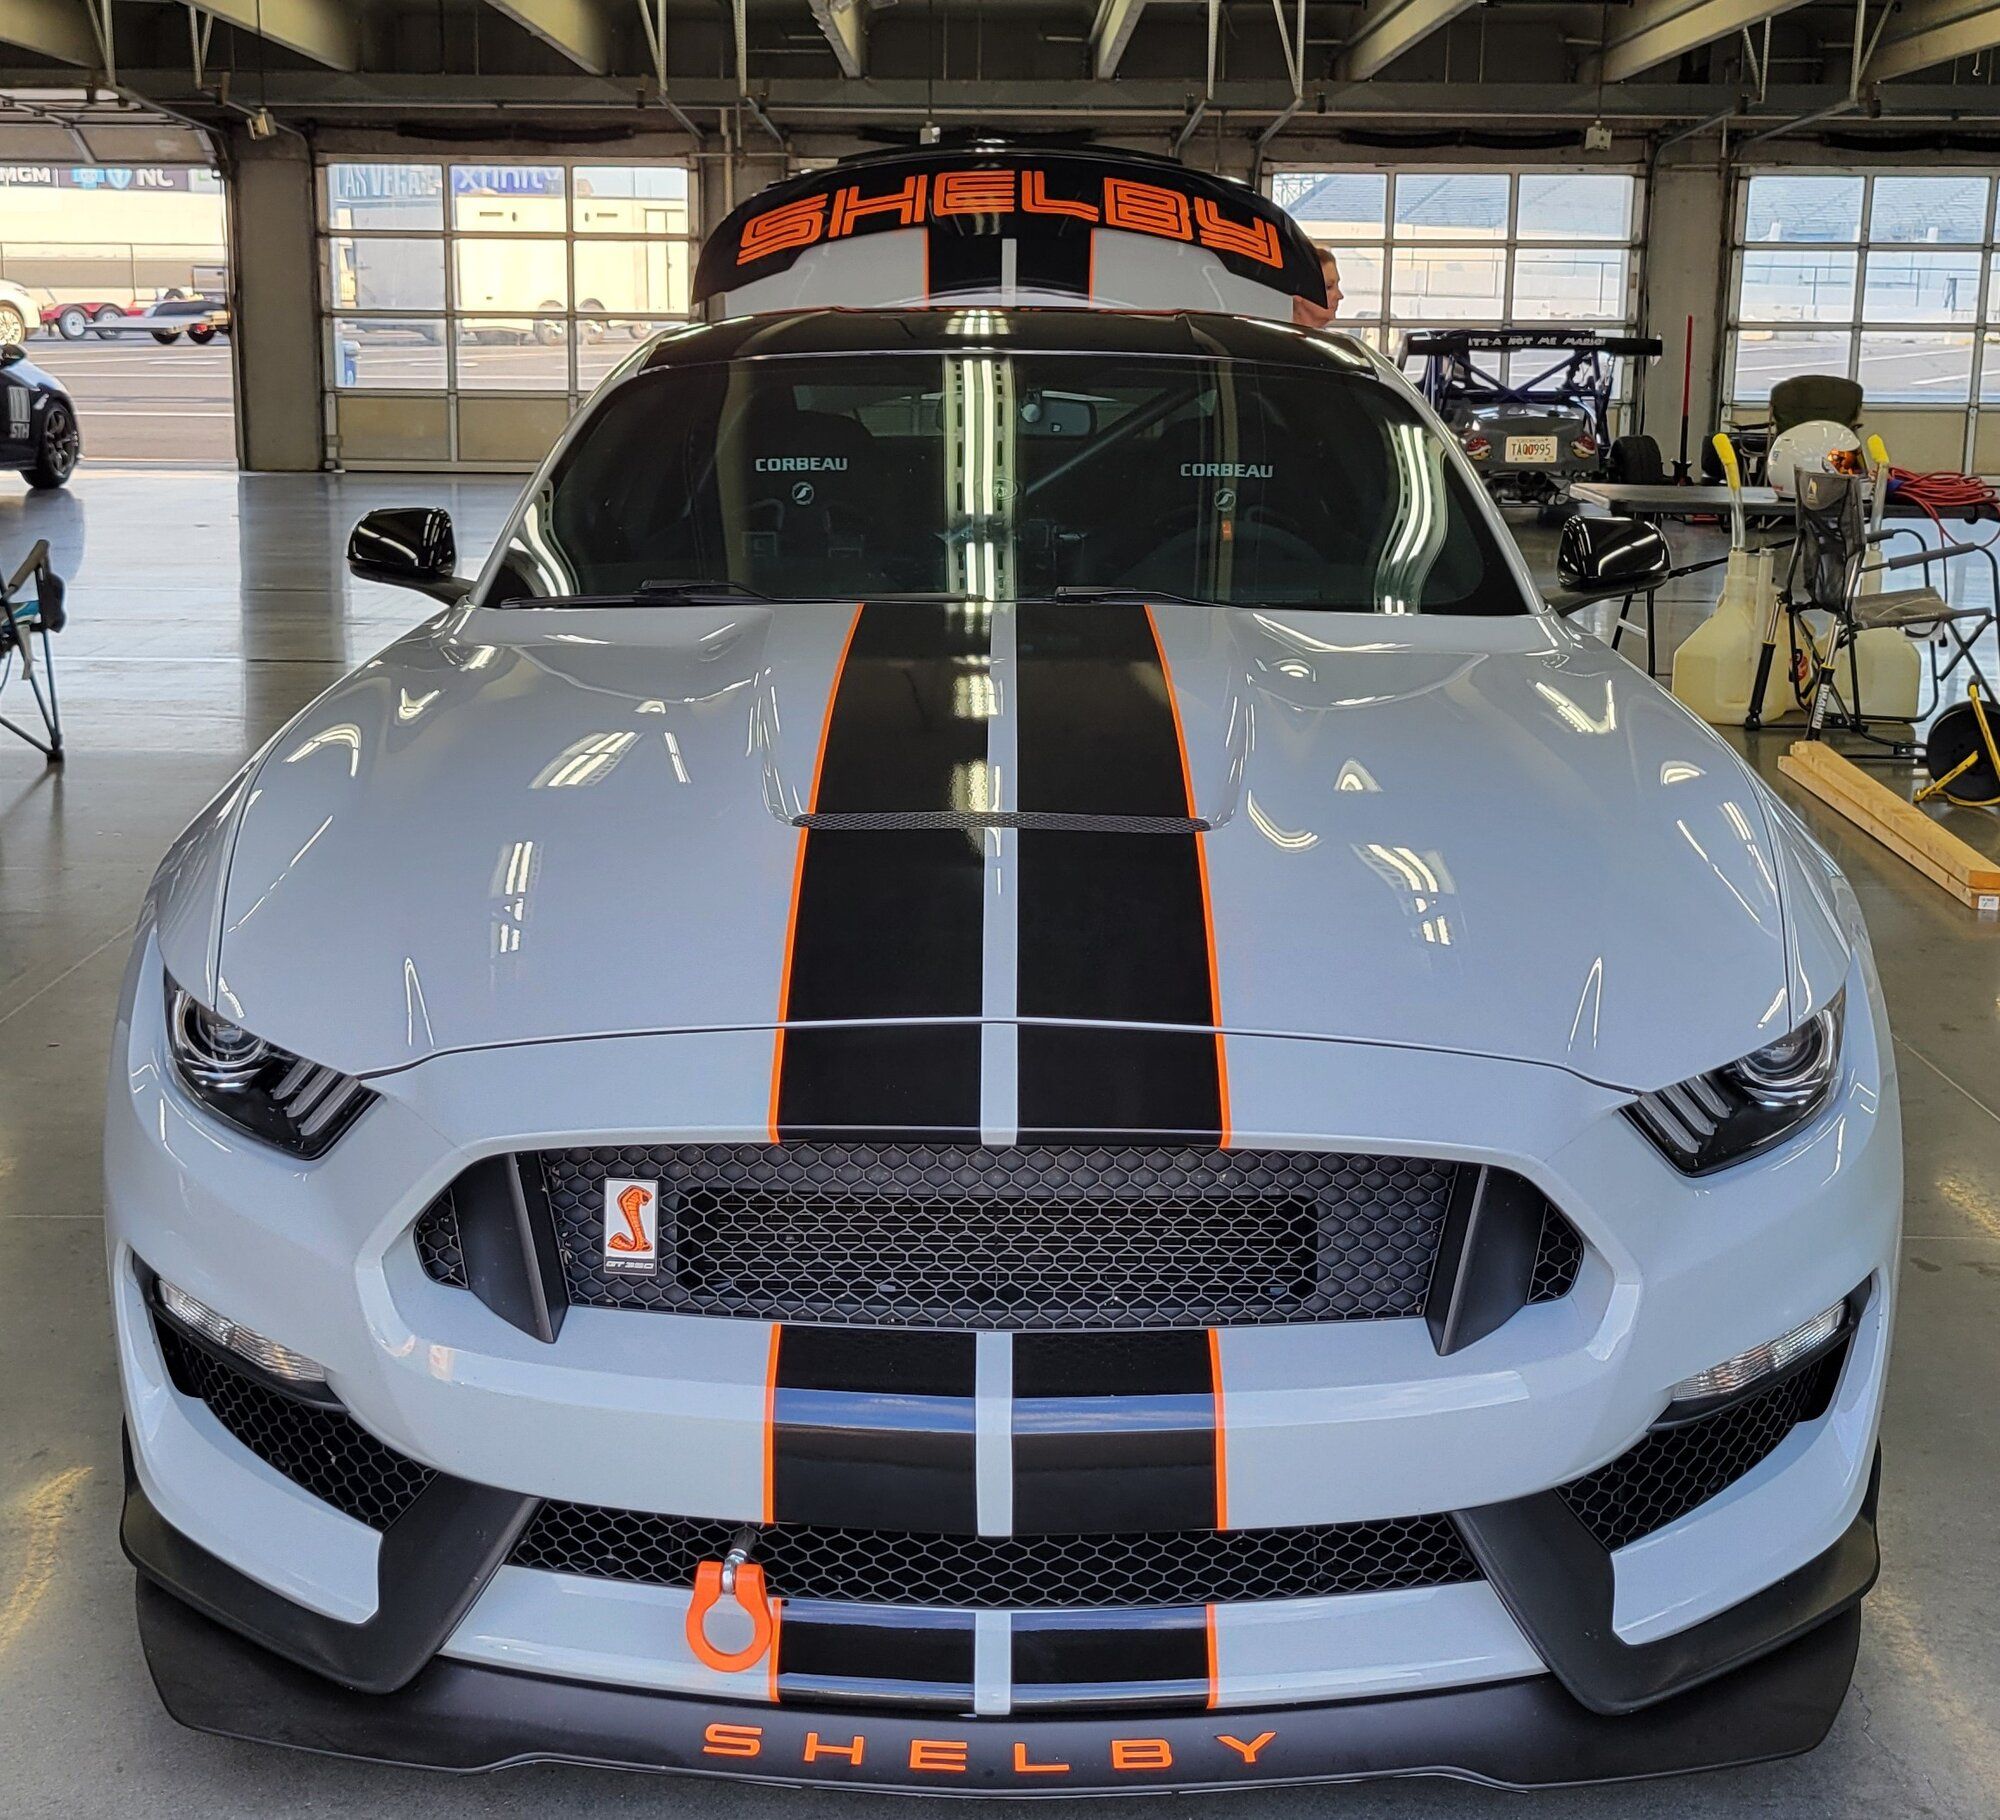 2017 Ford Mustang
GT350 specs, lap times, build thread